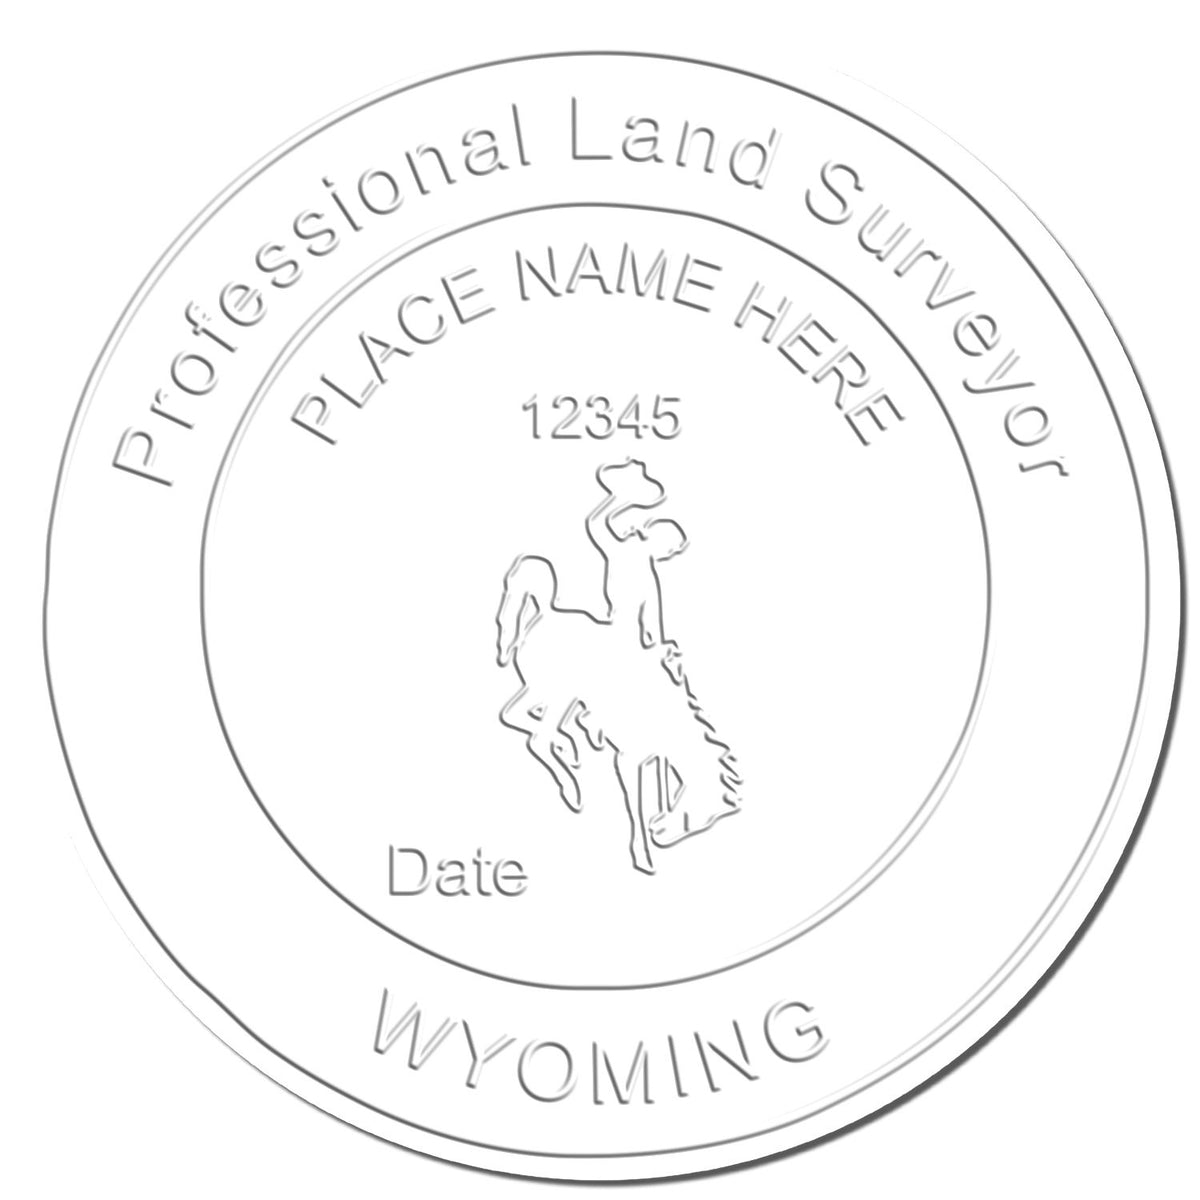 This paper is stamped with a sample imprint of the Gift Wyoming Land Surveyor Seal, signifying its quality and reliability.